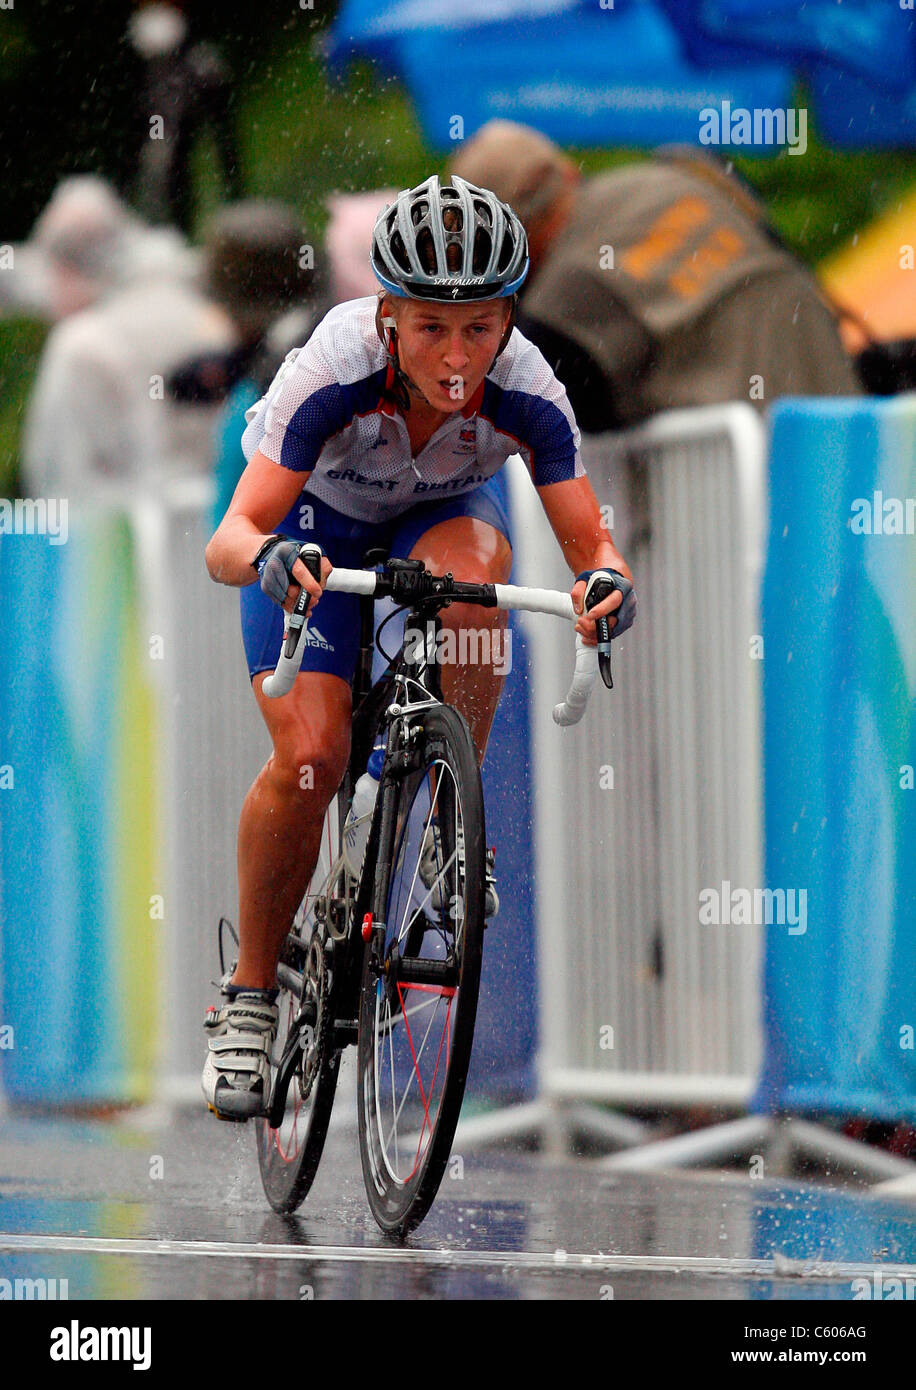 EMMA POOLEY WOMENS CYCLING ROAD RACE OLYMPIC STADIUM BEIJING CHINA 10 August 2008 Stock Photo